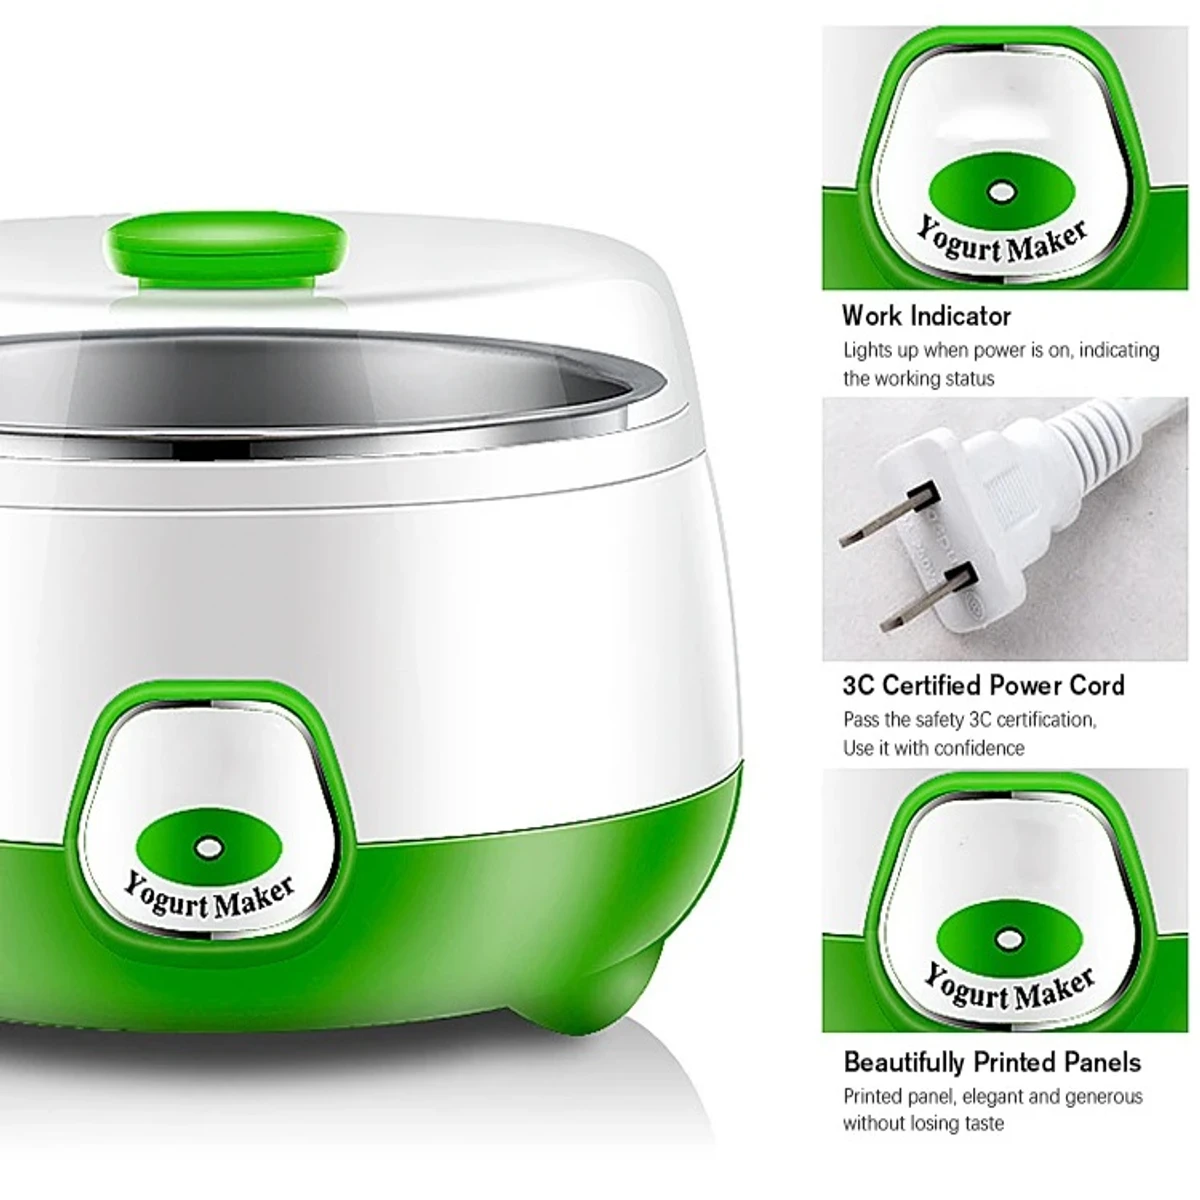 Premium - High-Quality ABS and PP - 1L Capacity - 220-240V/50Hz - 15W - Automatic Electric Yogurt Maker